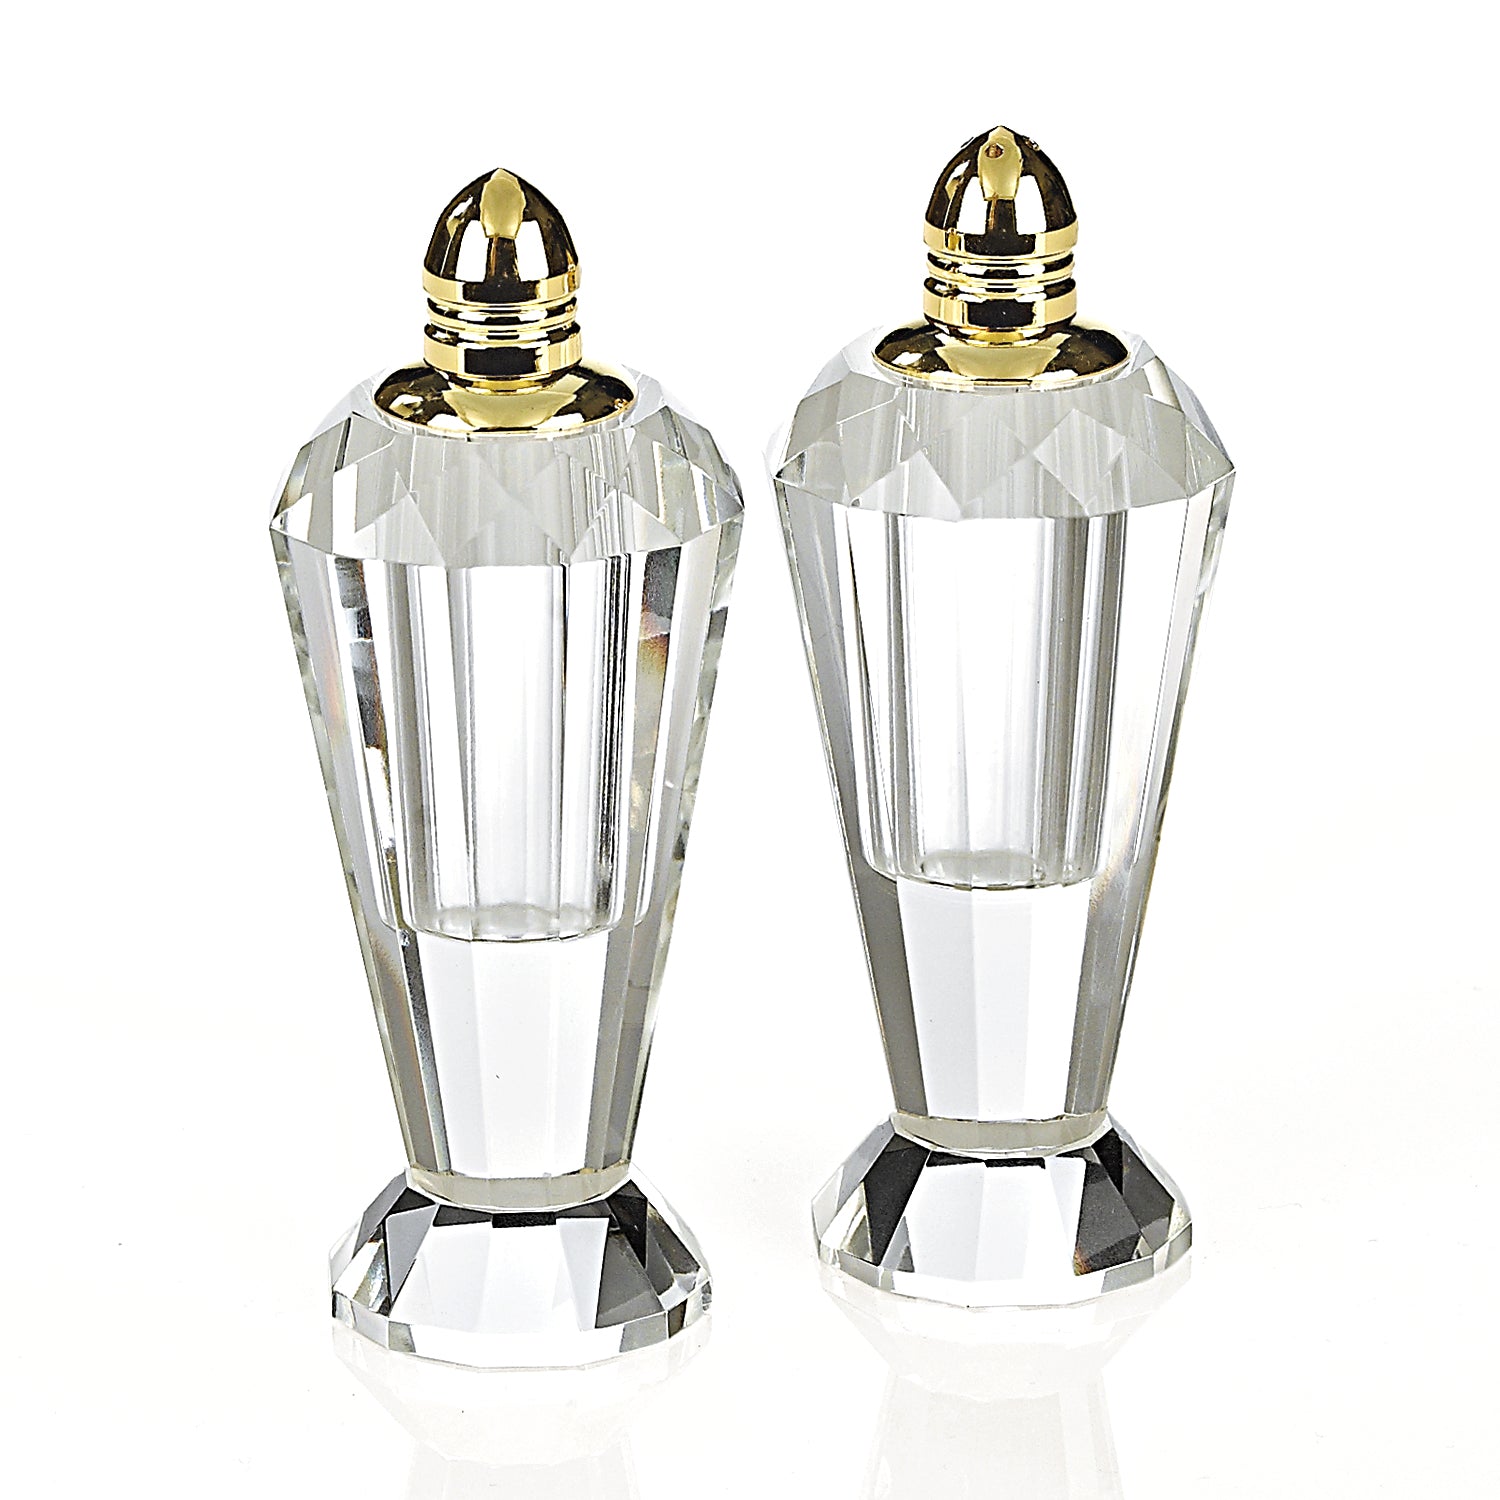 Handcrafted Optical Crystal And Gold Pair Of Salt And Pepper Shakers